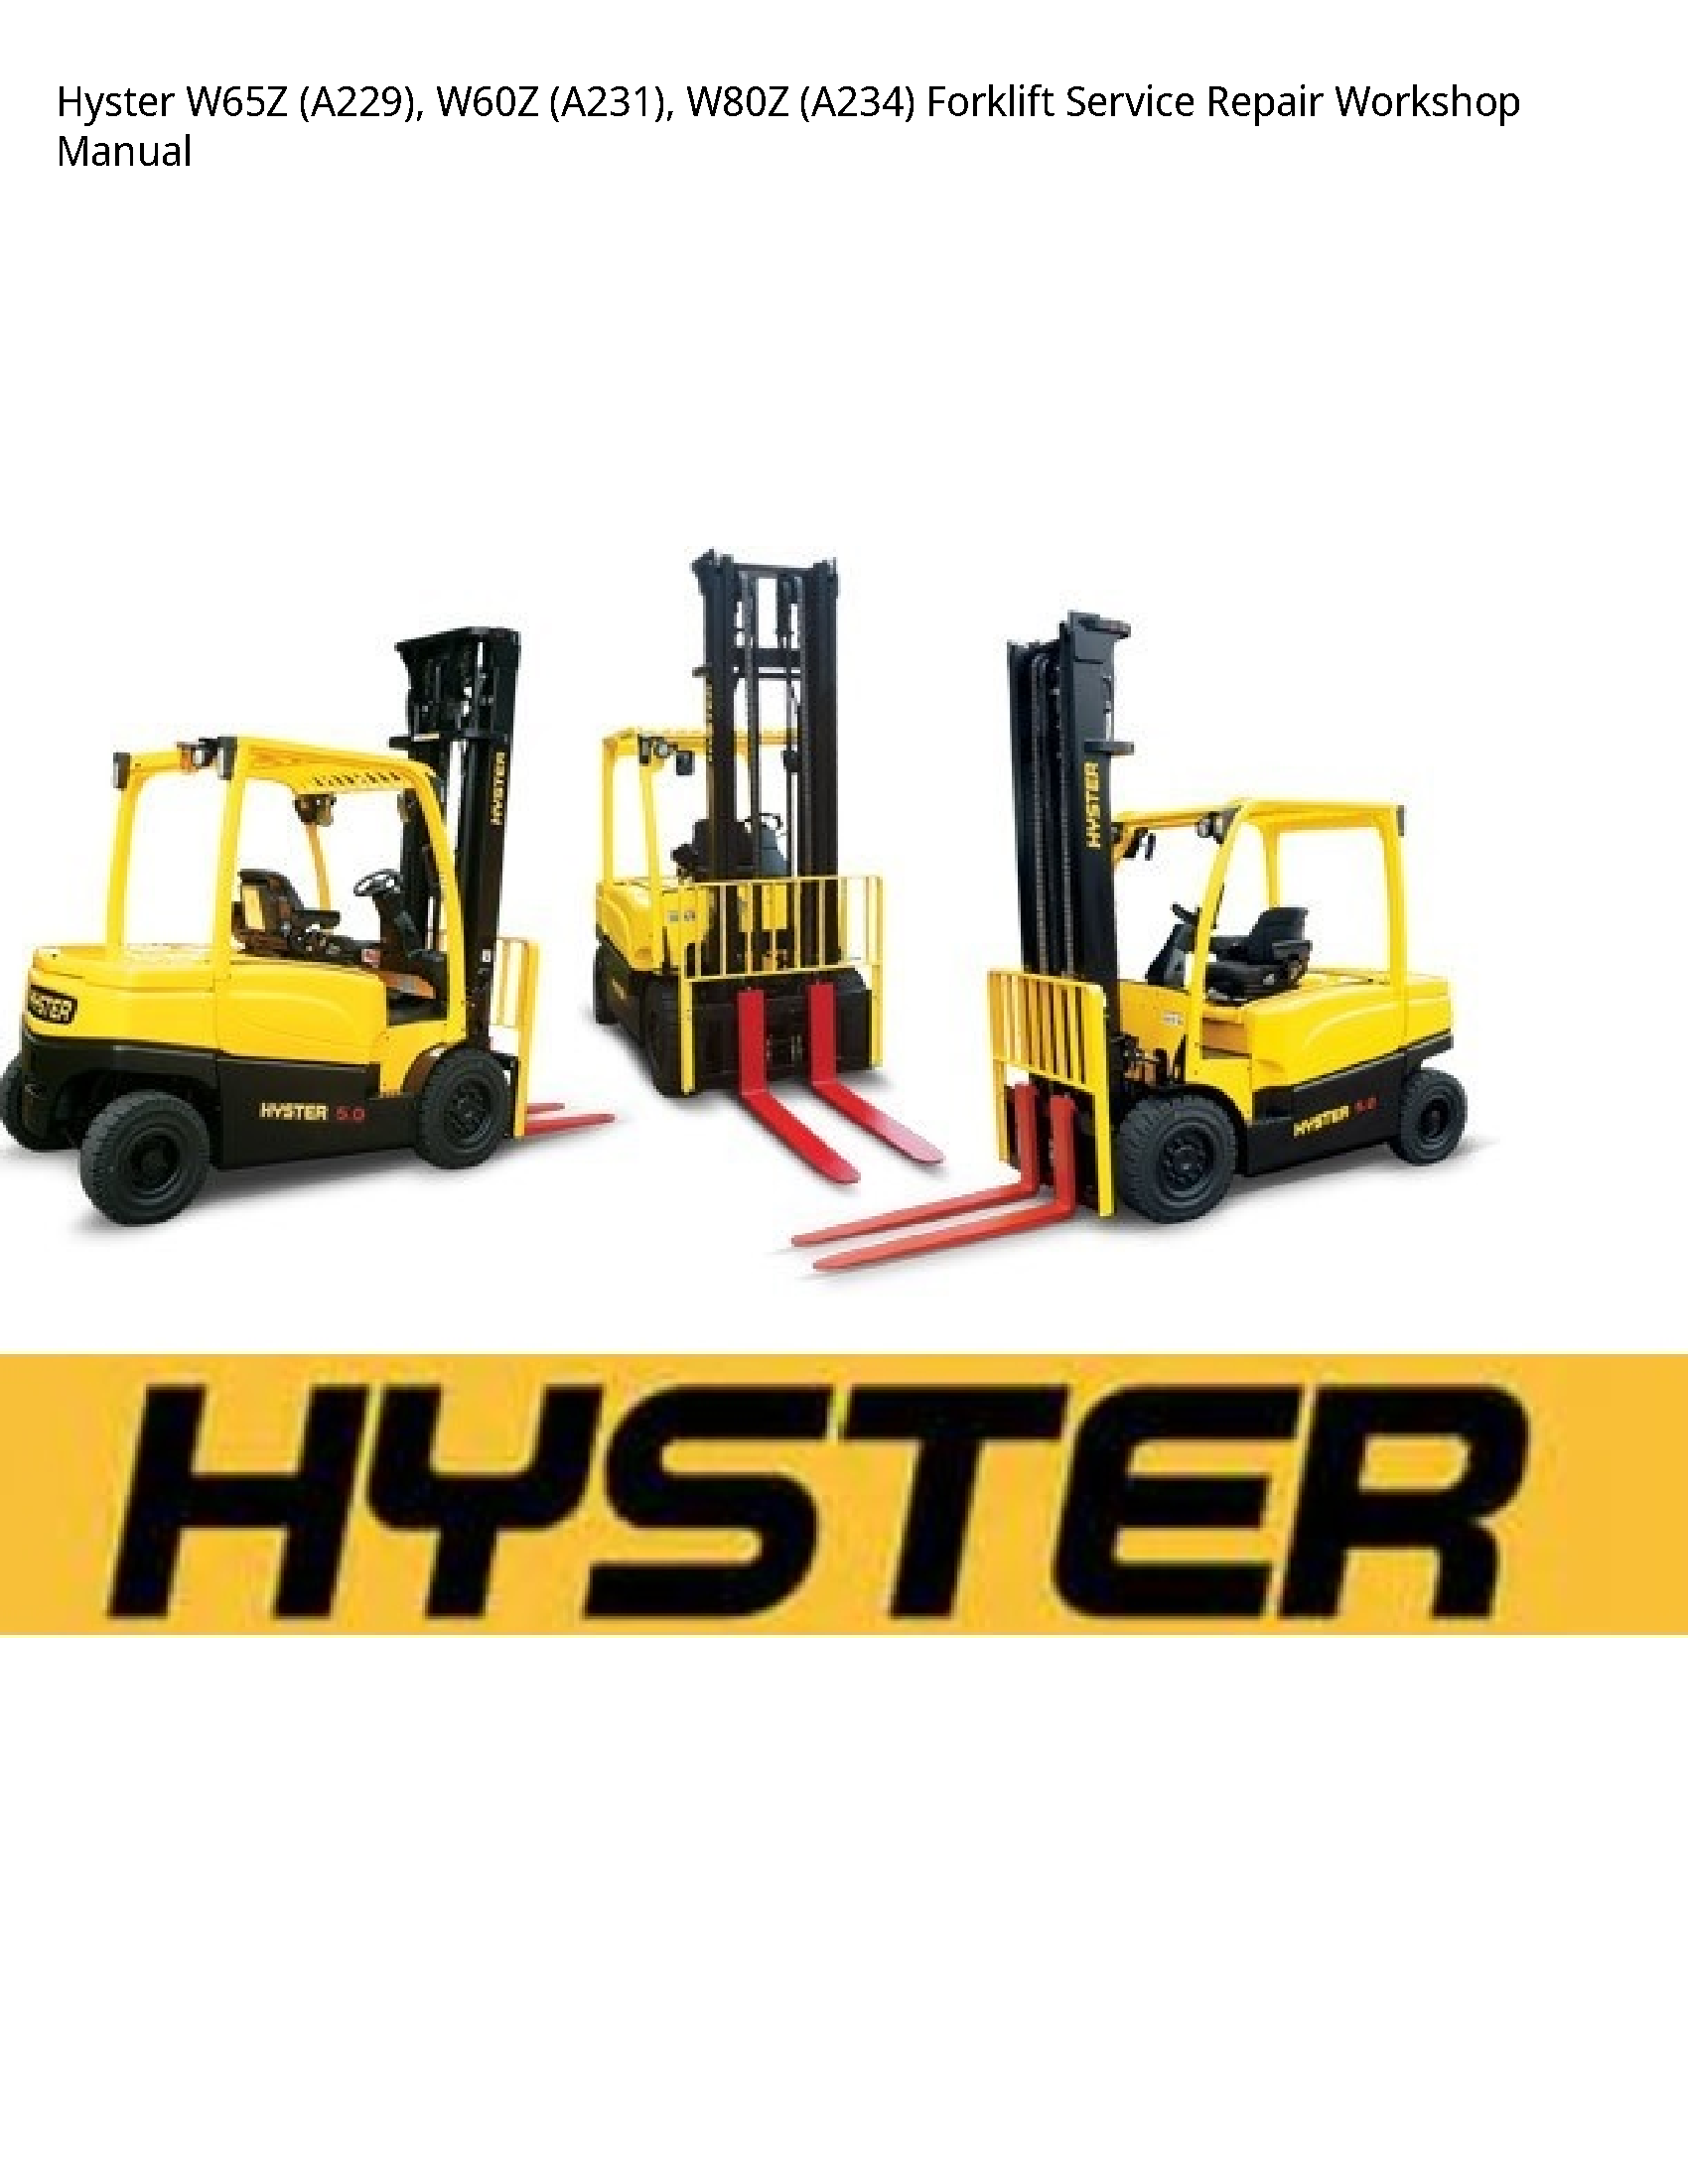 Hyster W65Z Forklift manual